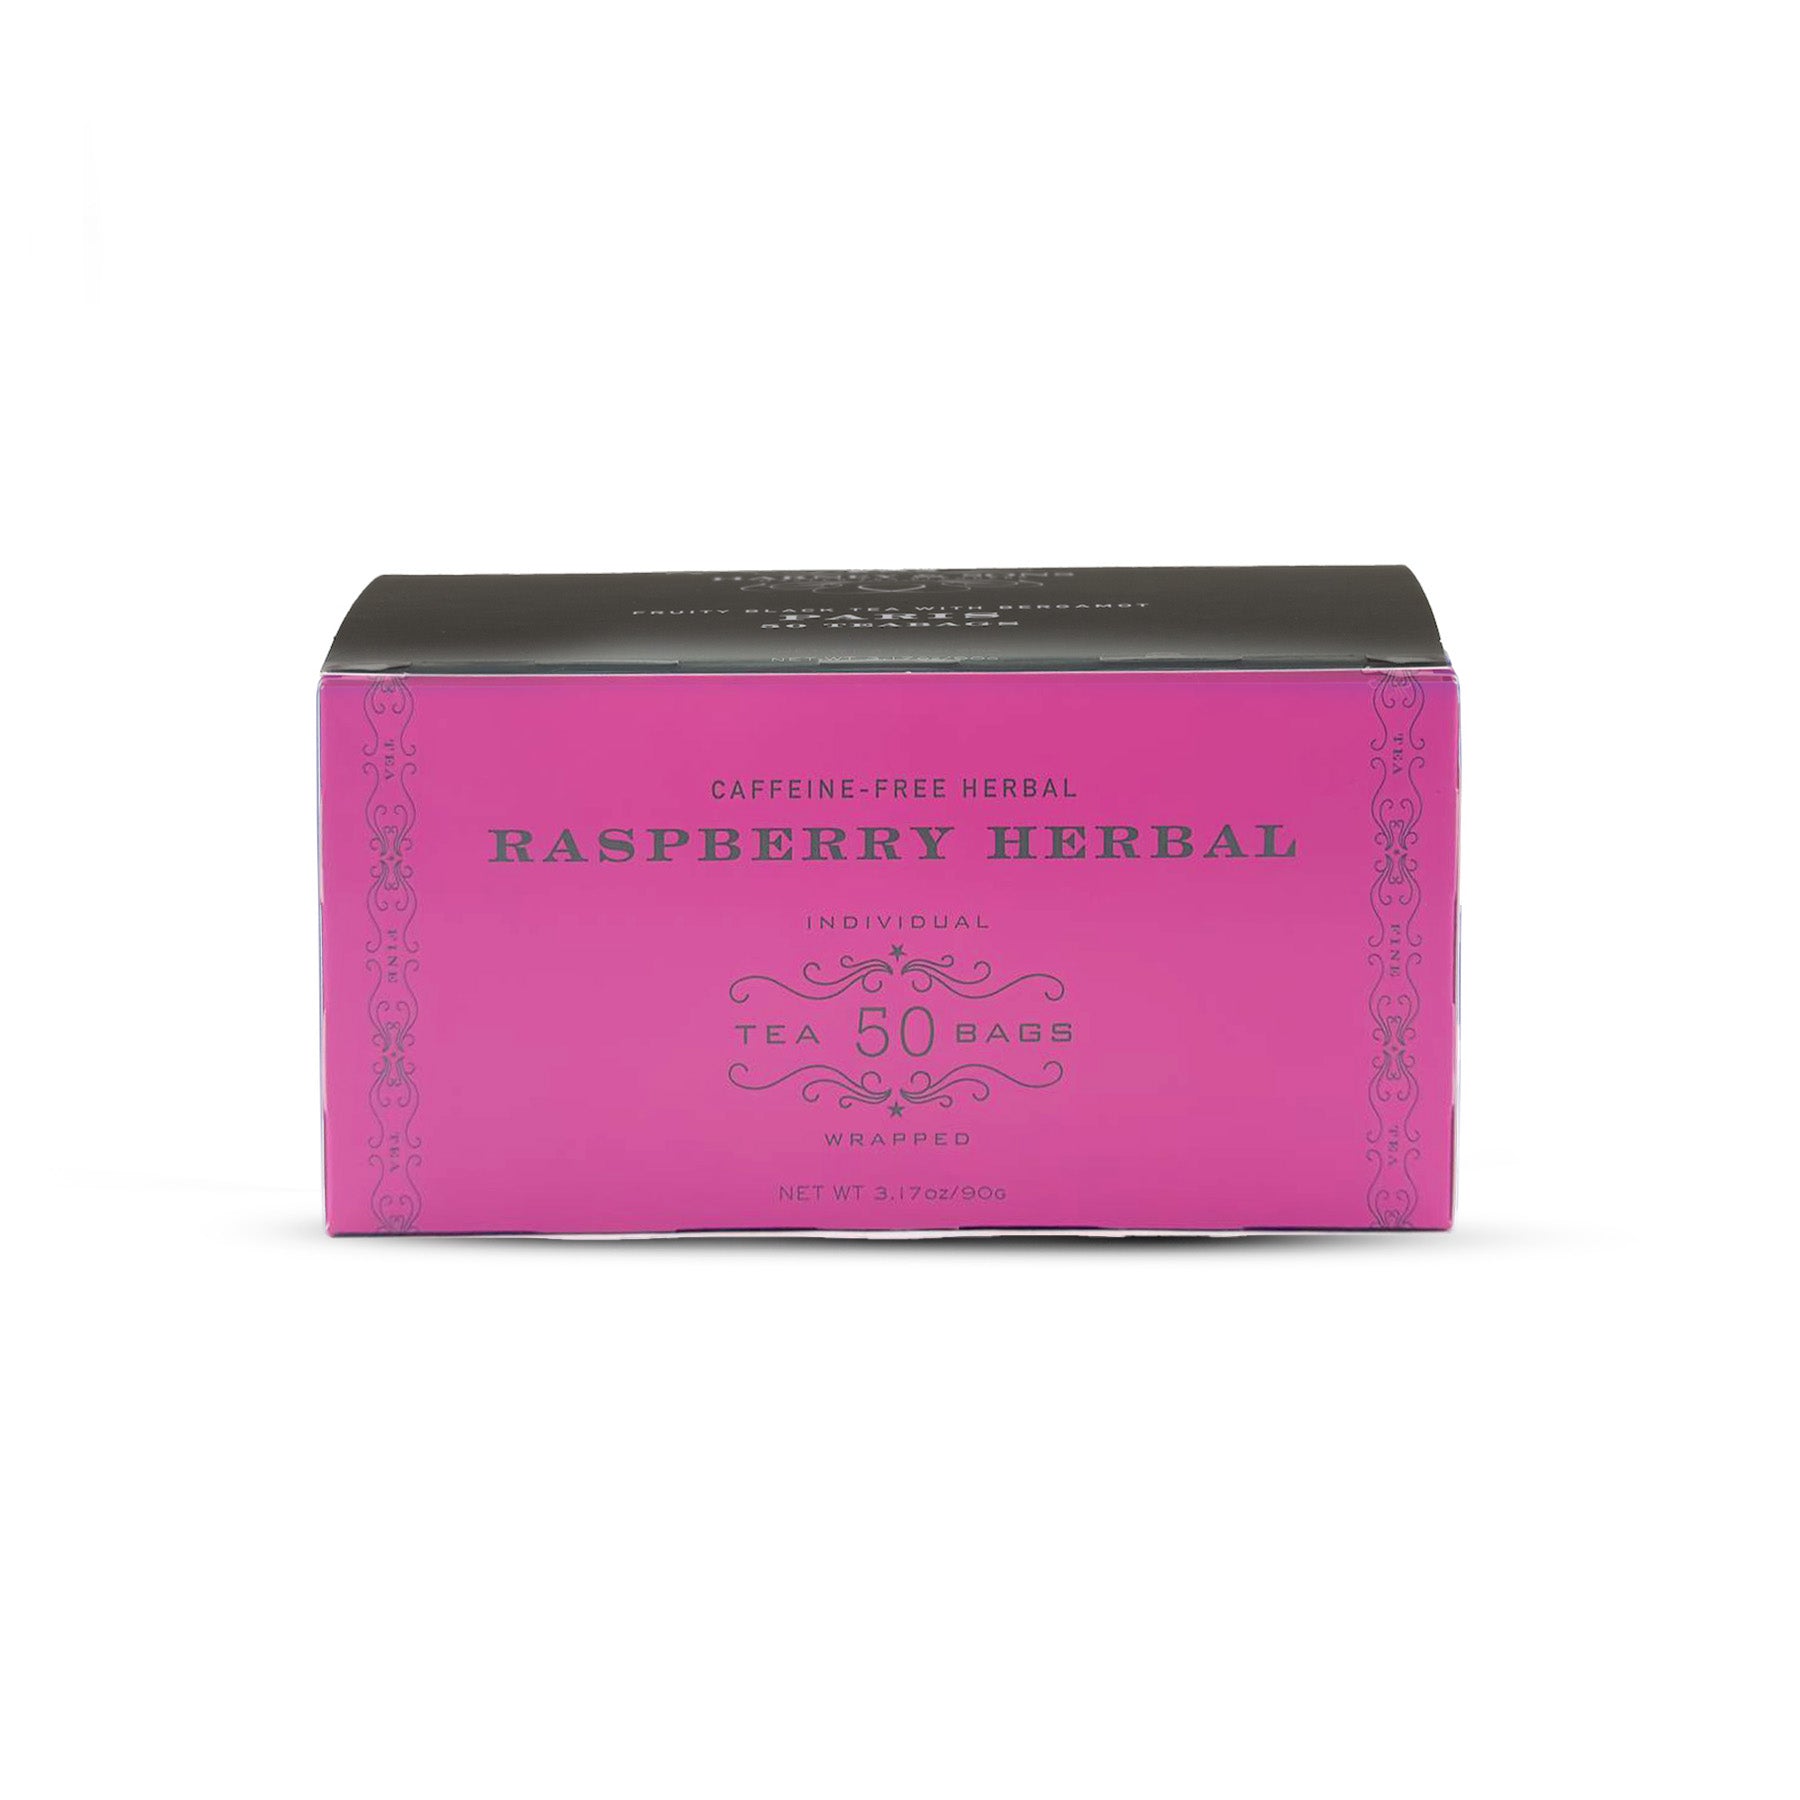 Raspberry Herbal - Teabags 50 CT Foil Wrapped Teabags - Harney & Sons Fine Teas Europe